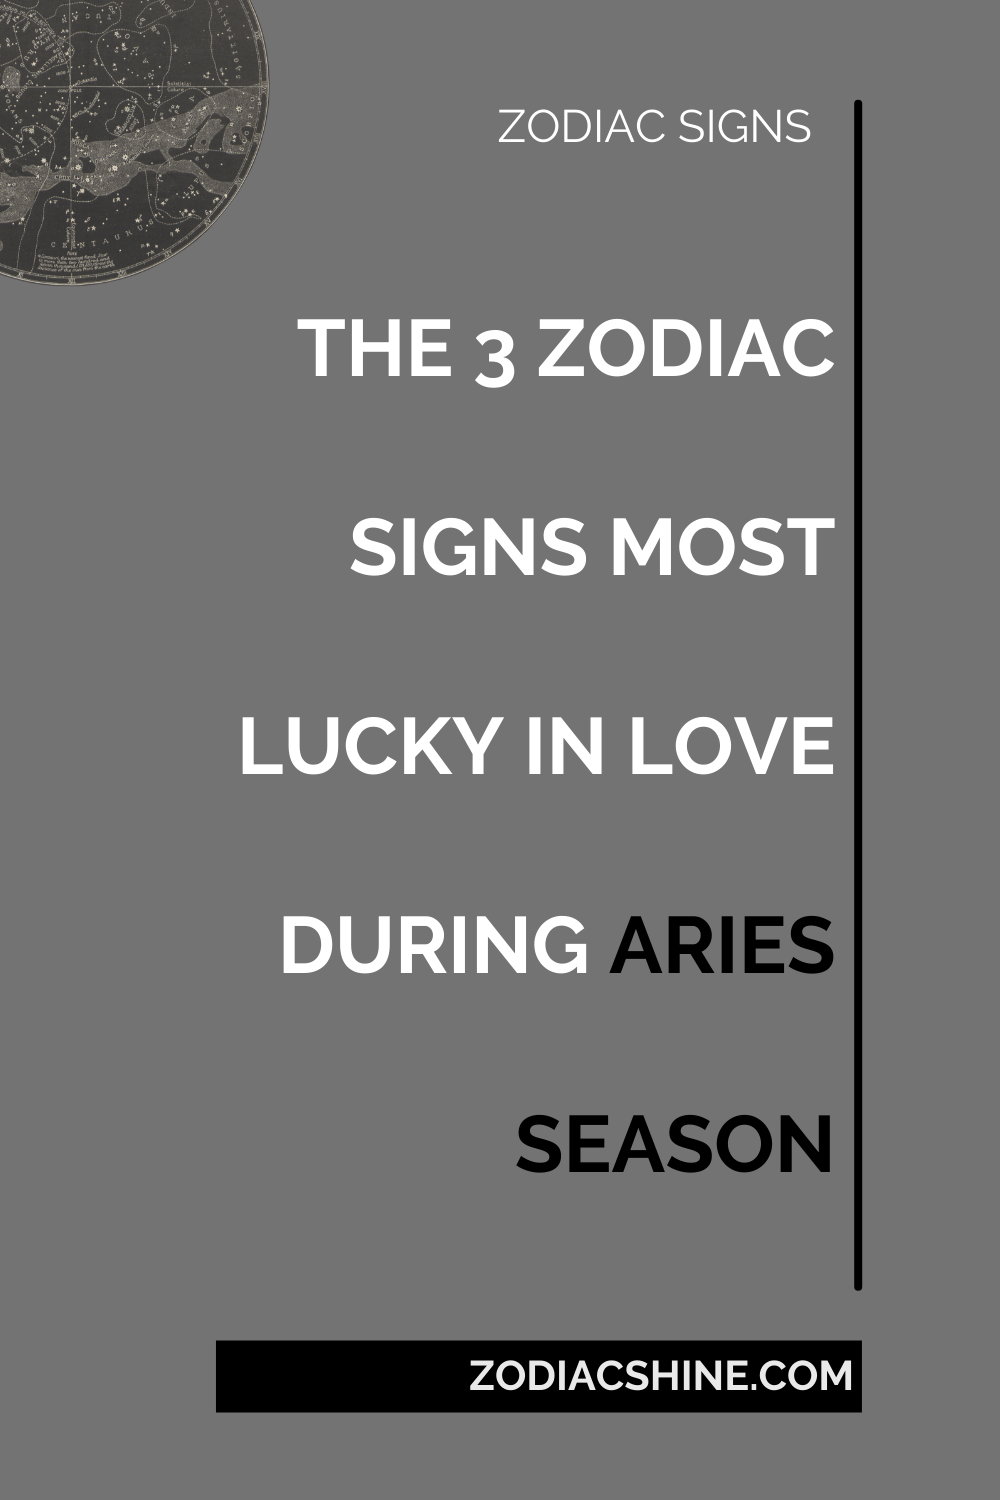 THE 3 ZODIAC SIGNS MOST LUCKY IN LOVE DURING ARIES SEASON